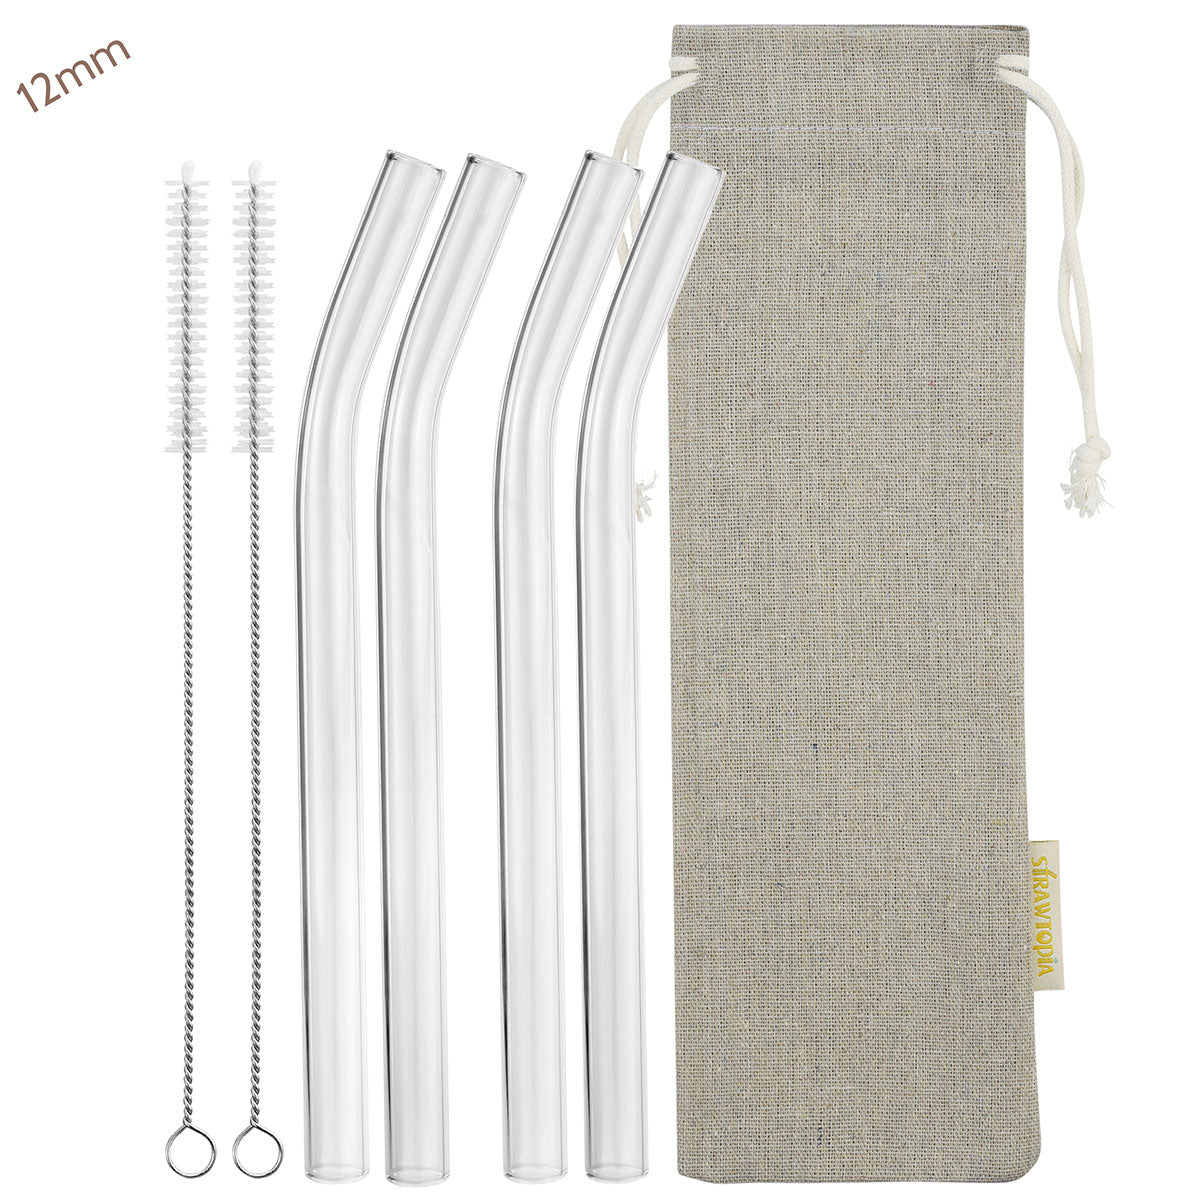 12MM EXTRA WIDE REUSABLE METAL STRAWS ECO FRIENDLY SMOOTHIE